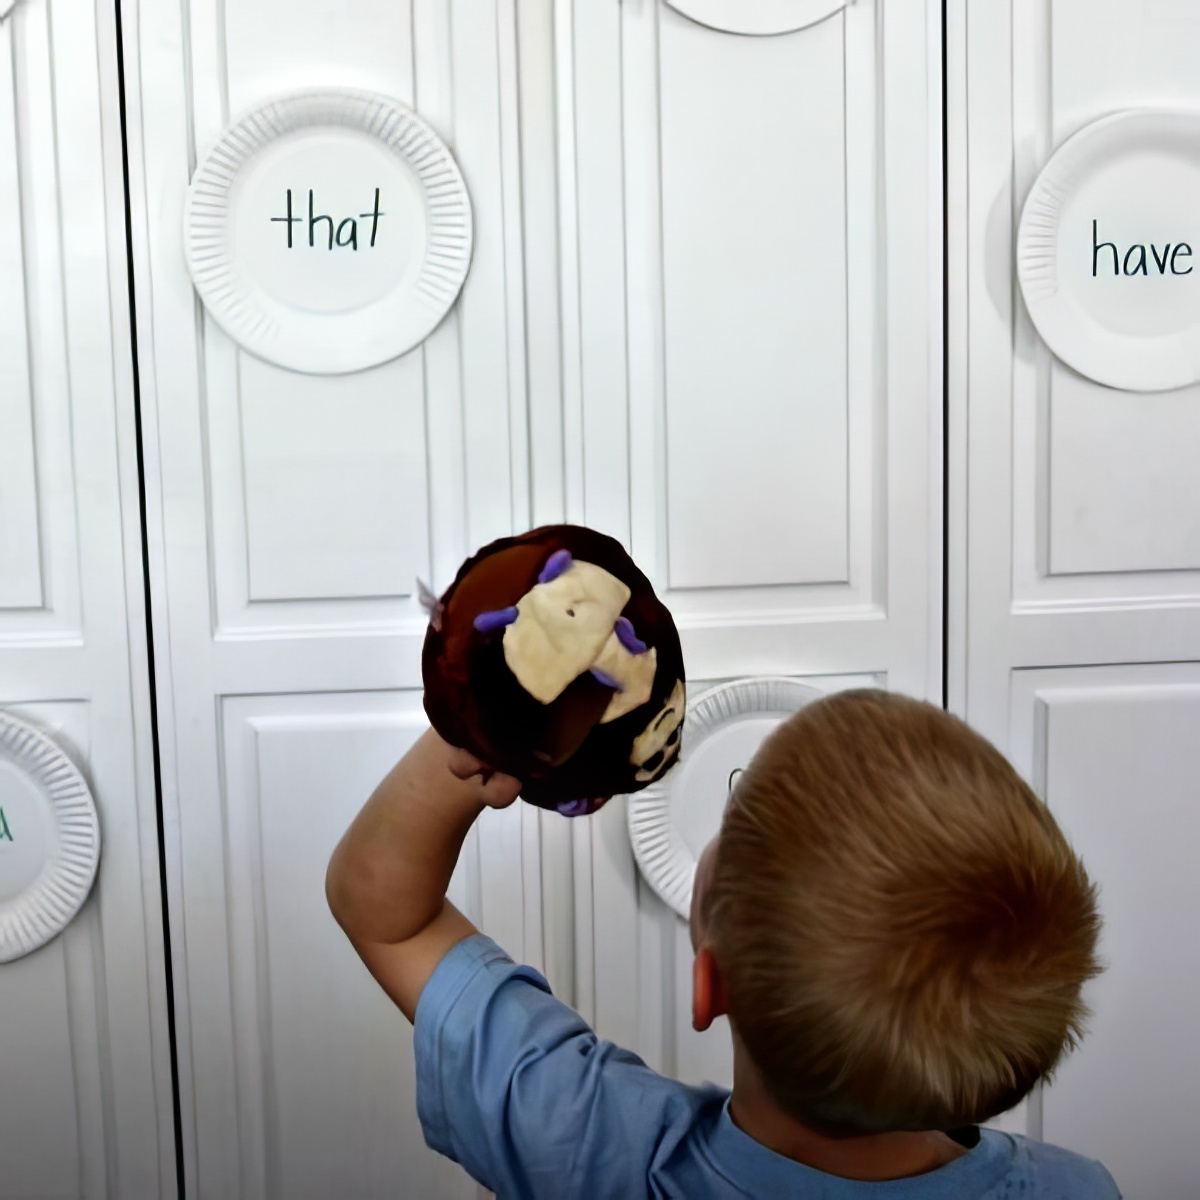 Learn sight words just like your playing darts with your kids!